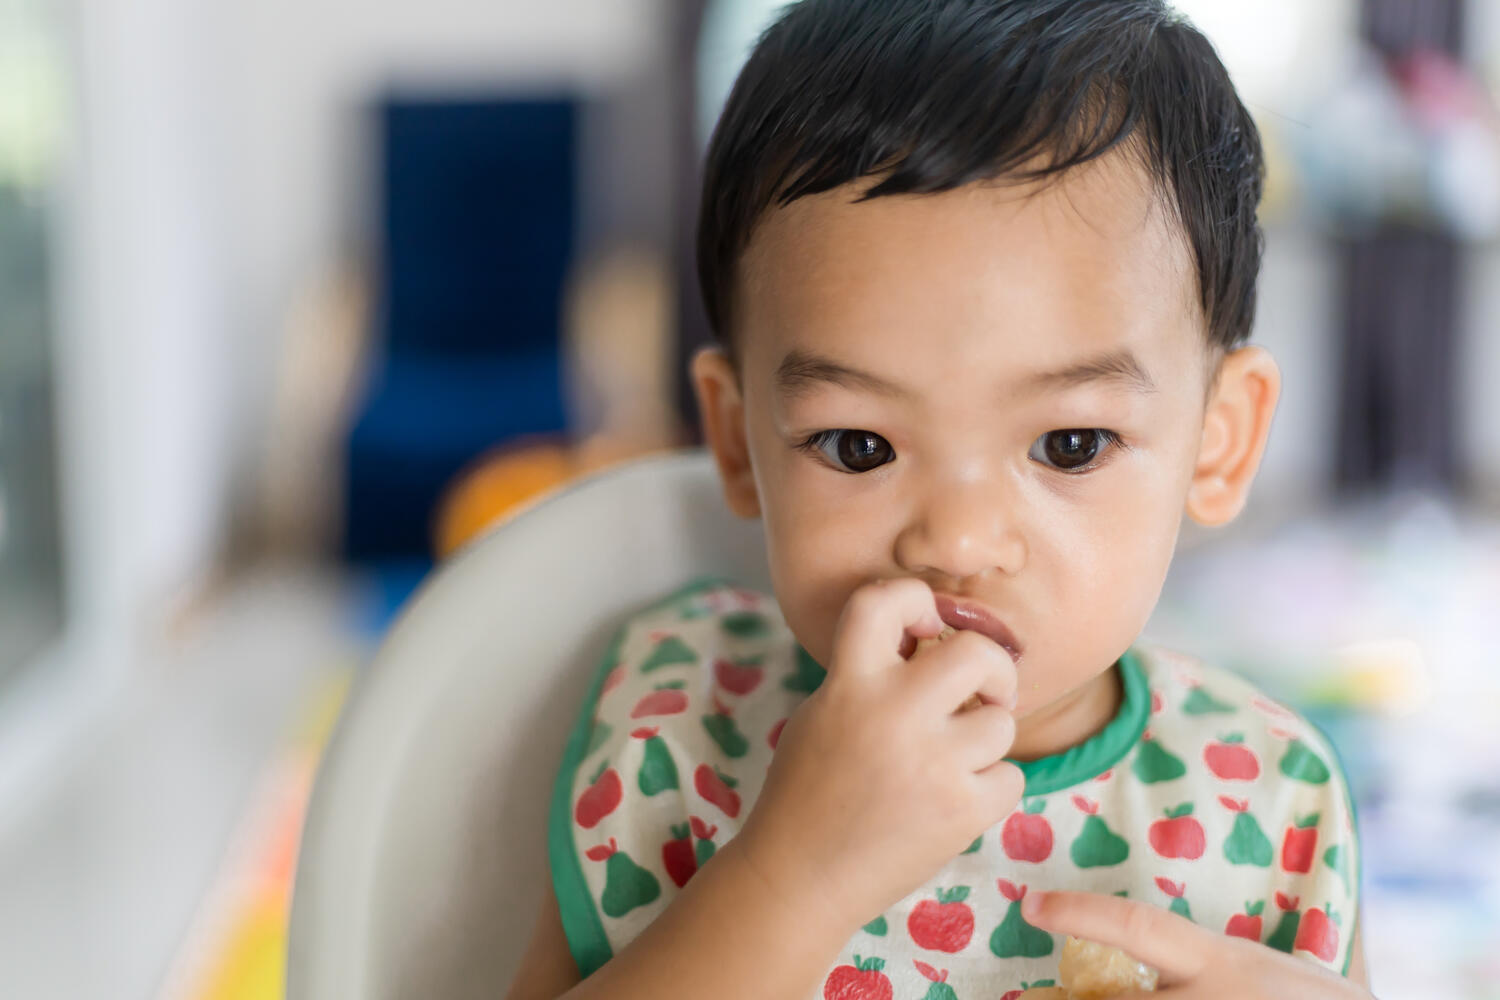 Take care to not give too small sized food pieces to toddlers